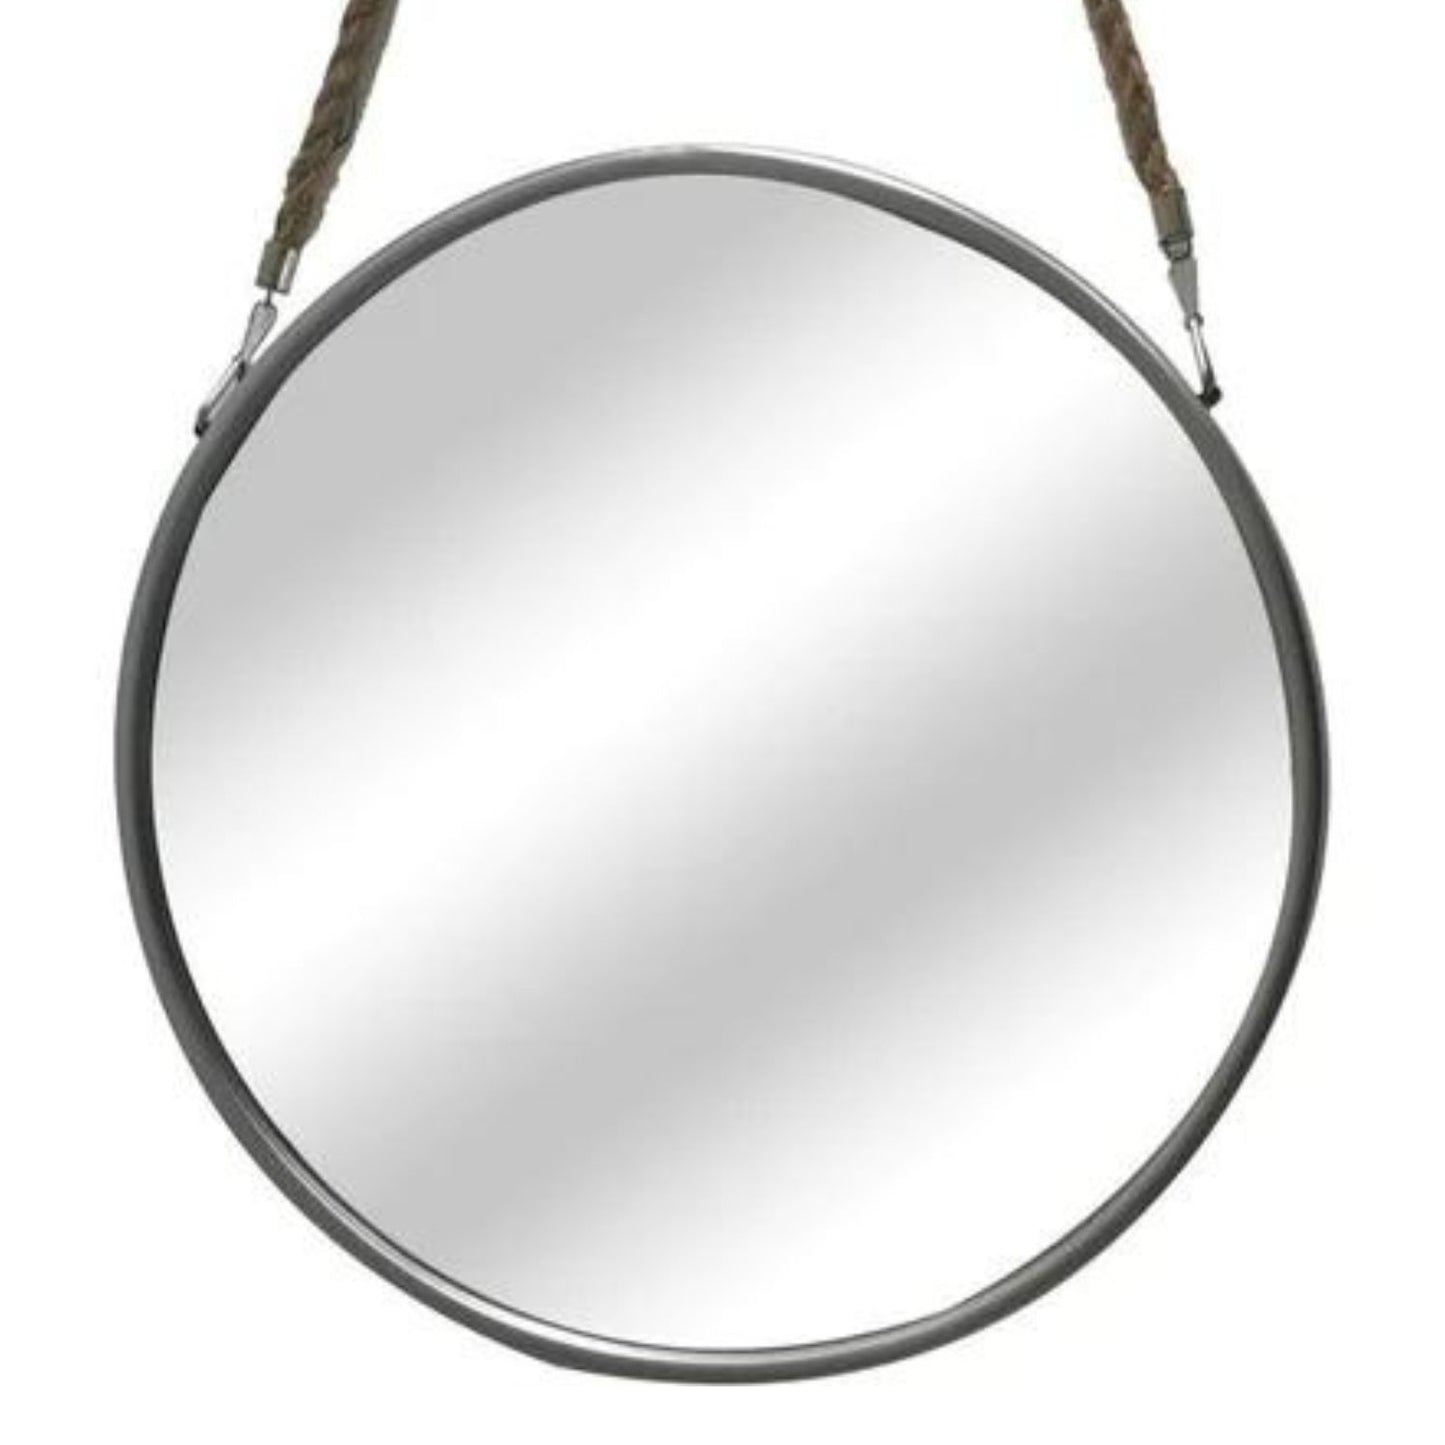 Silver circular mirror on rope with a nautical design